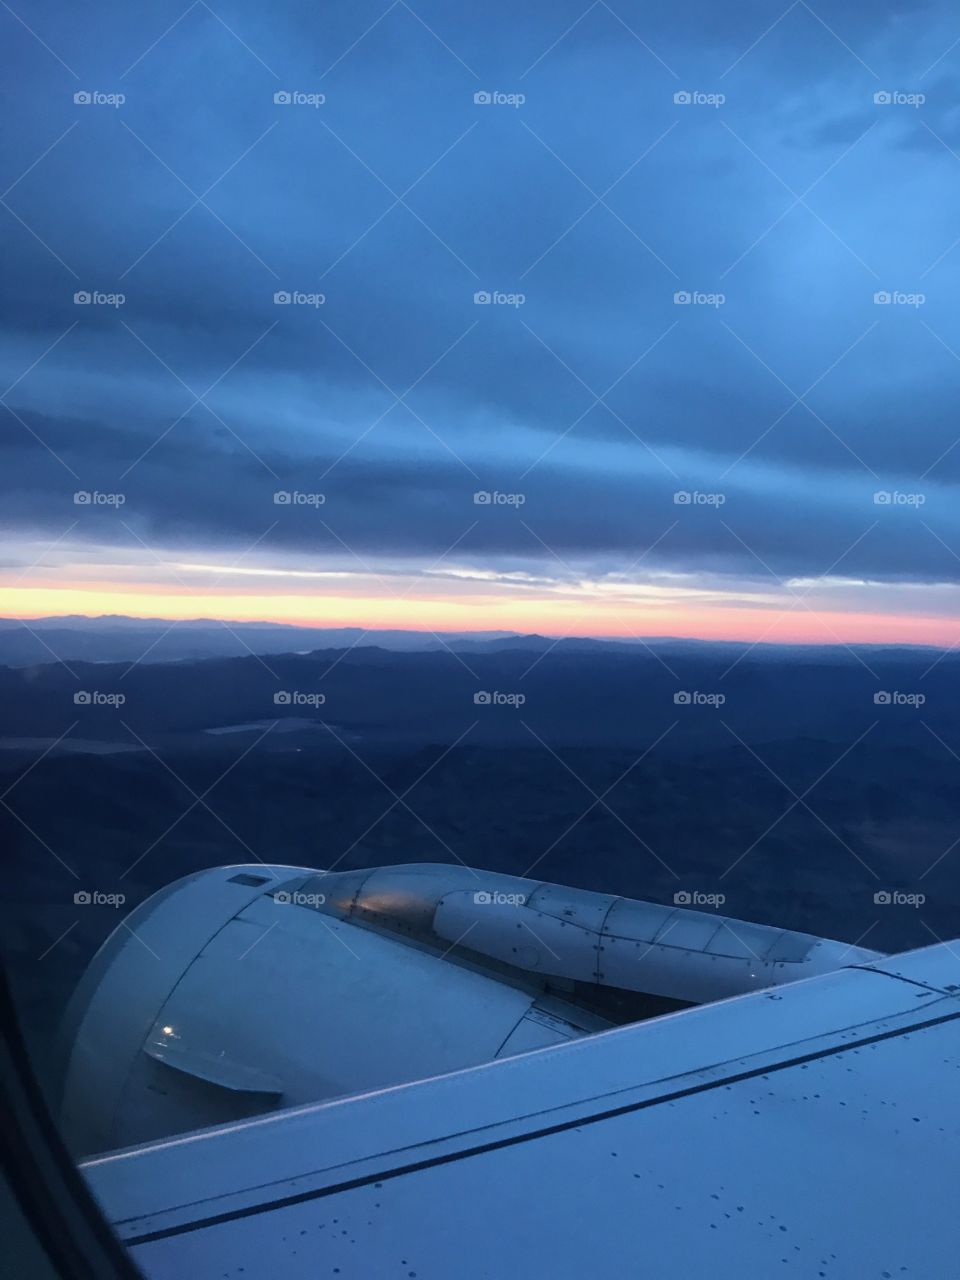 Breath taking image of the sunset from our airplane seat. You loose yourself in such beauty!